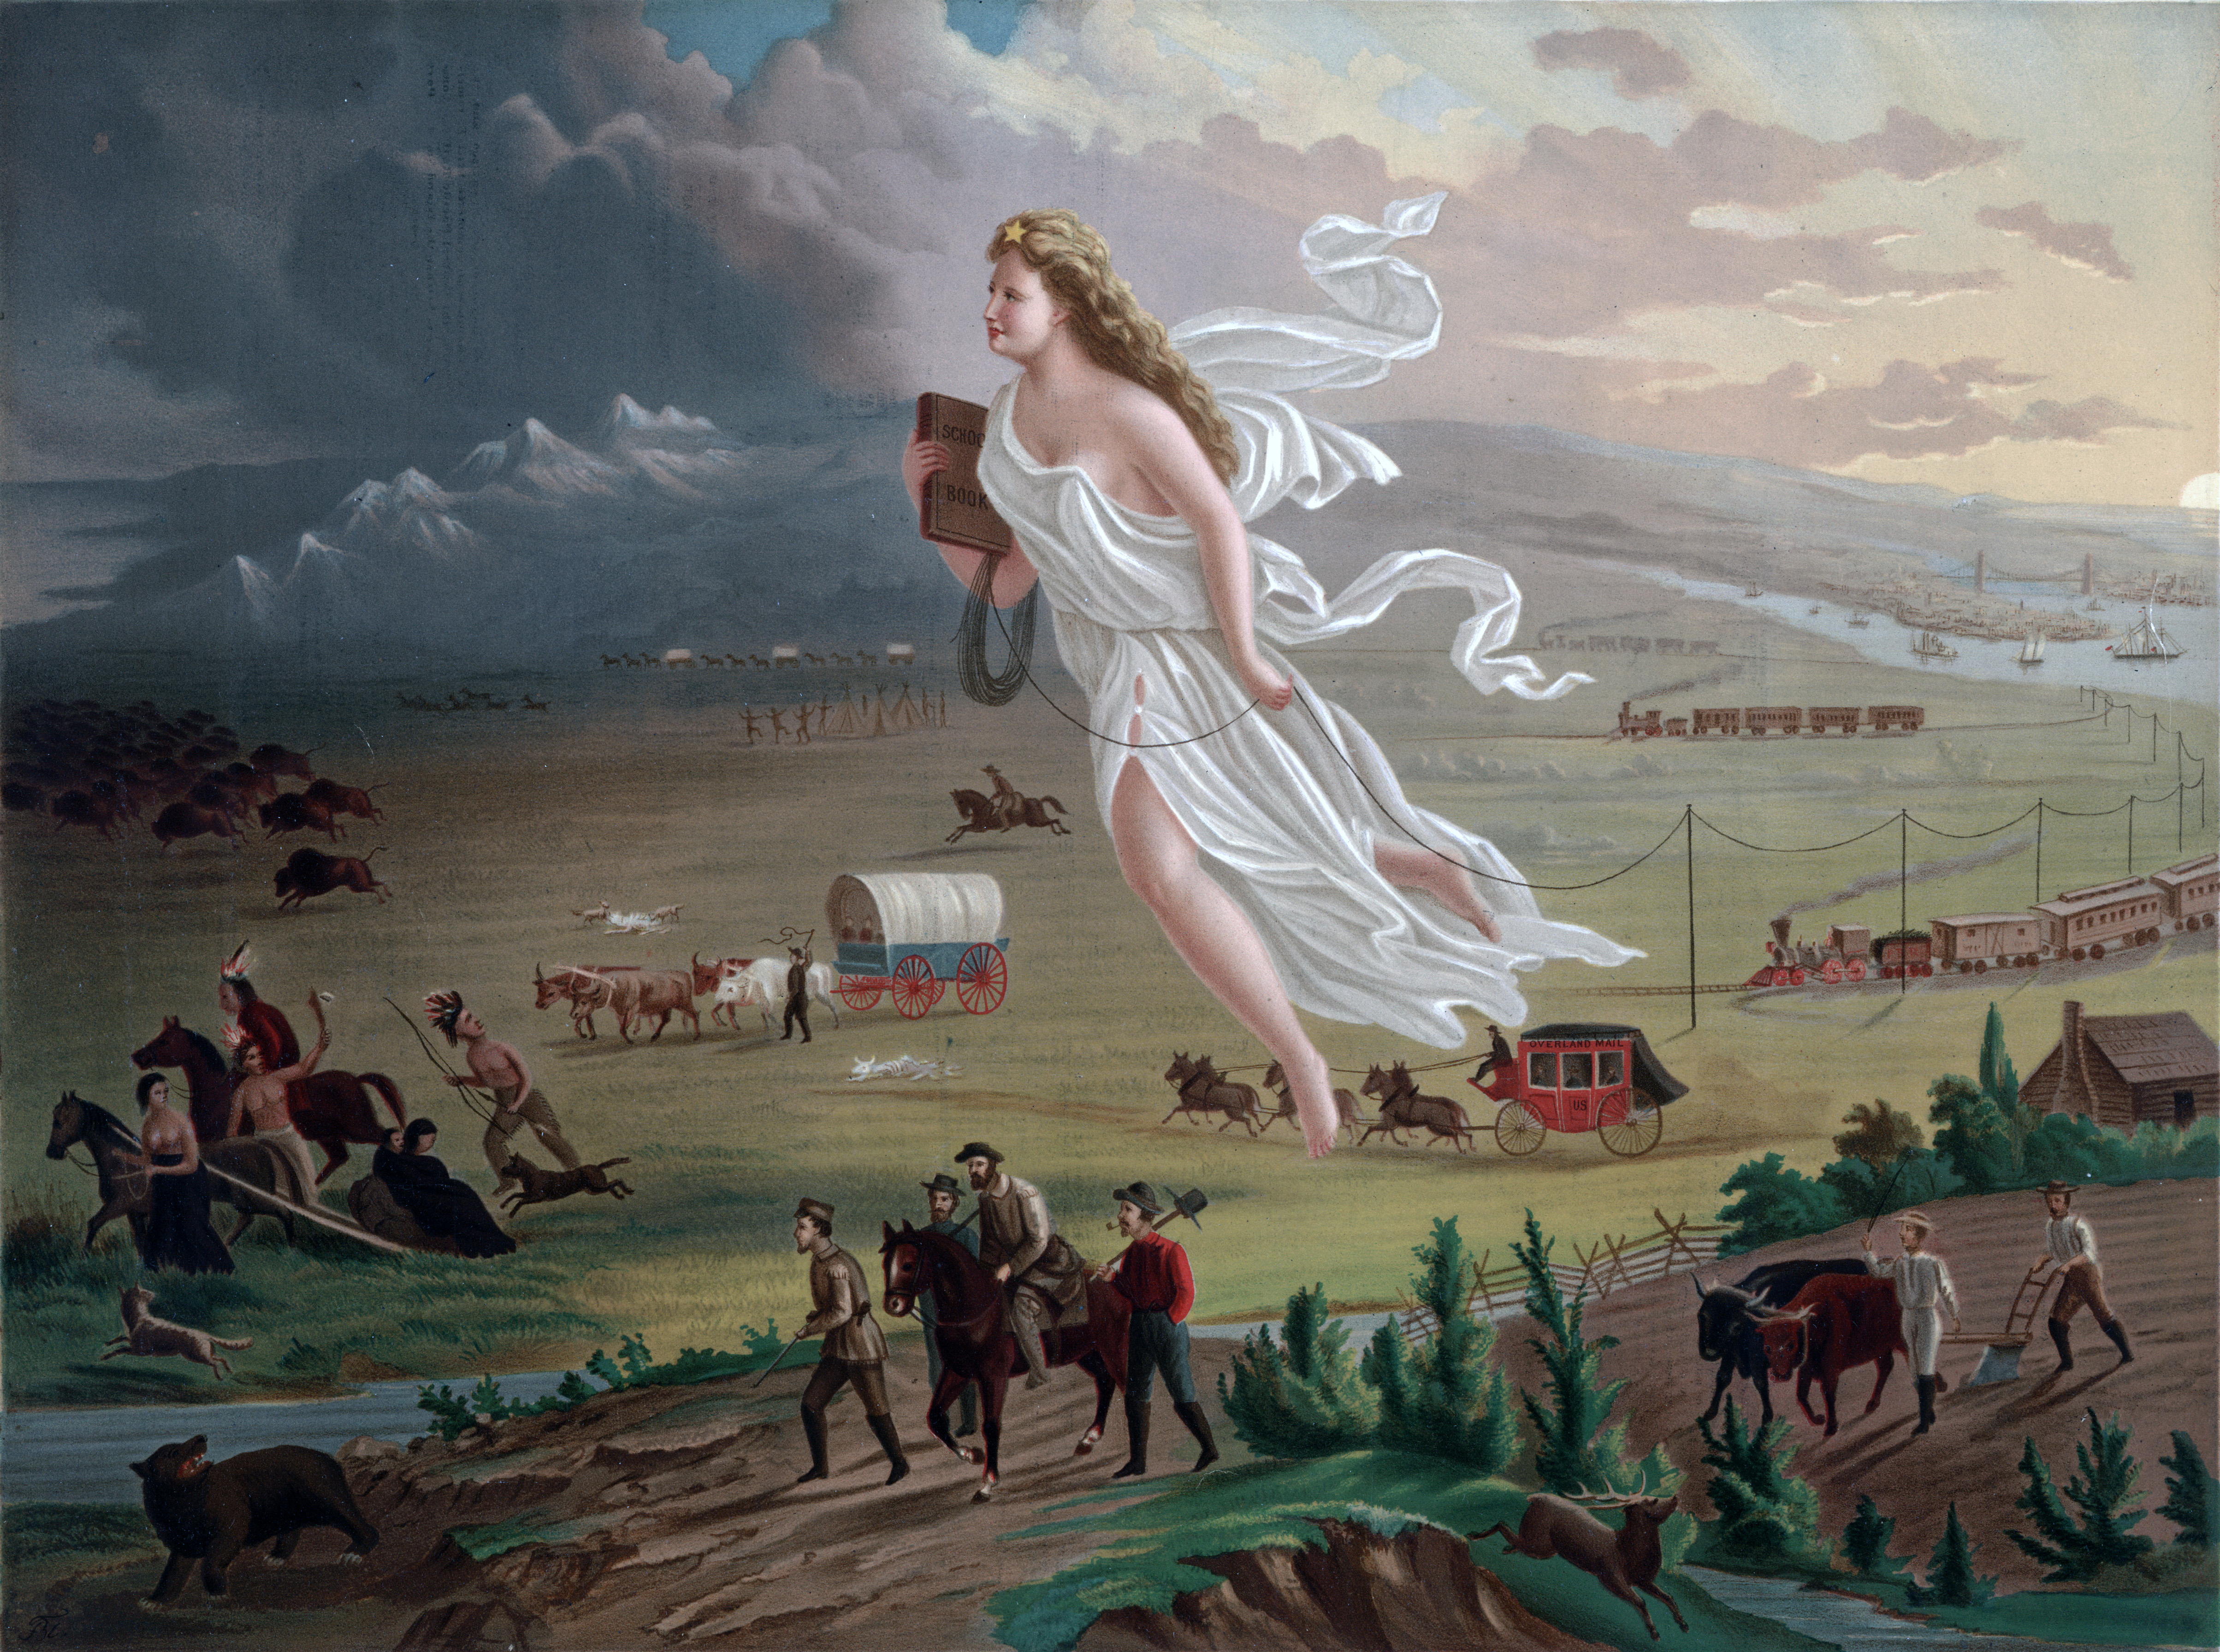 An image of a painting by John Gast from 1872 depicting a fair skinned woman floating above the frontier while settlers travel by horse and covered wagons below her.